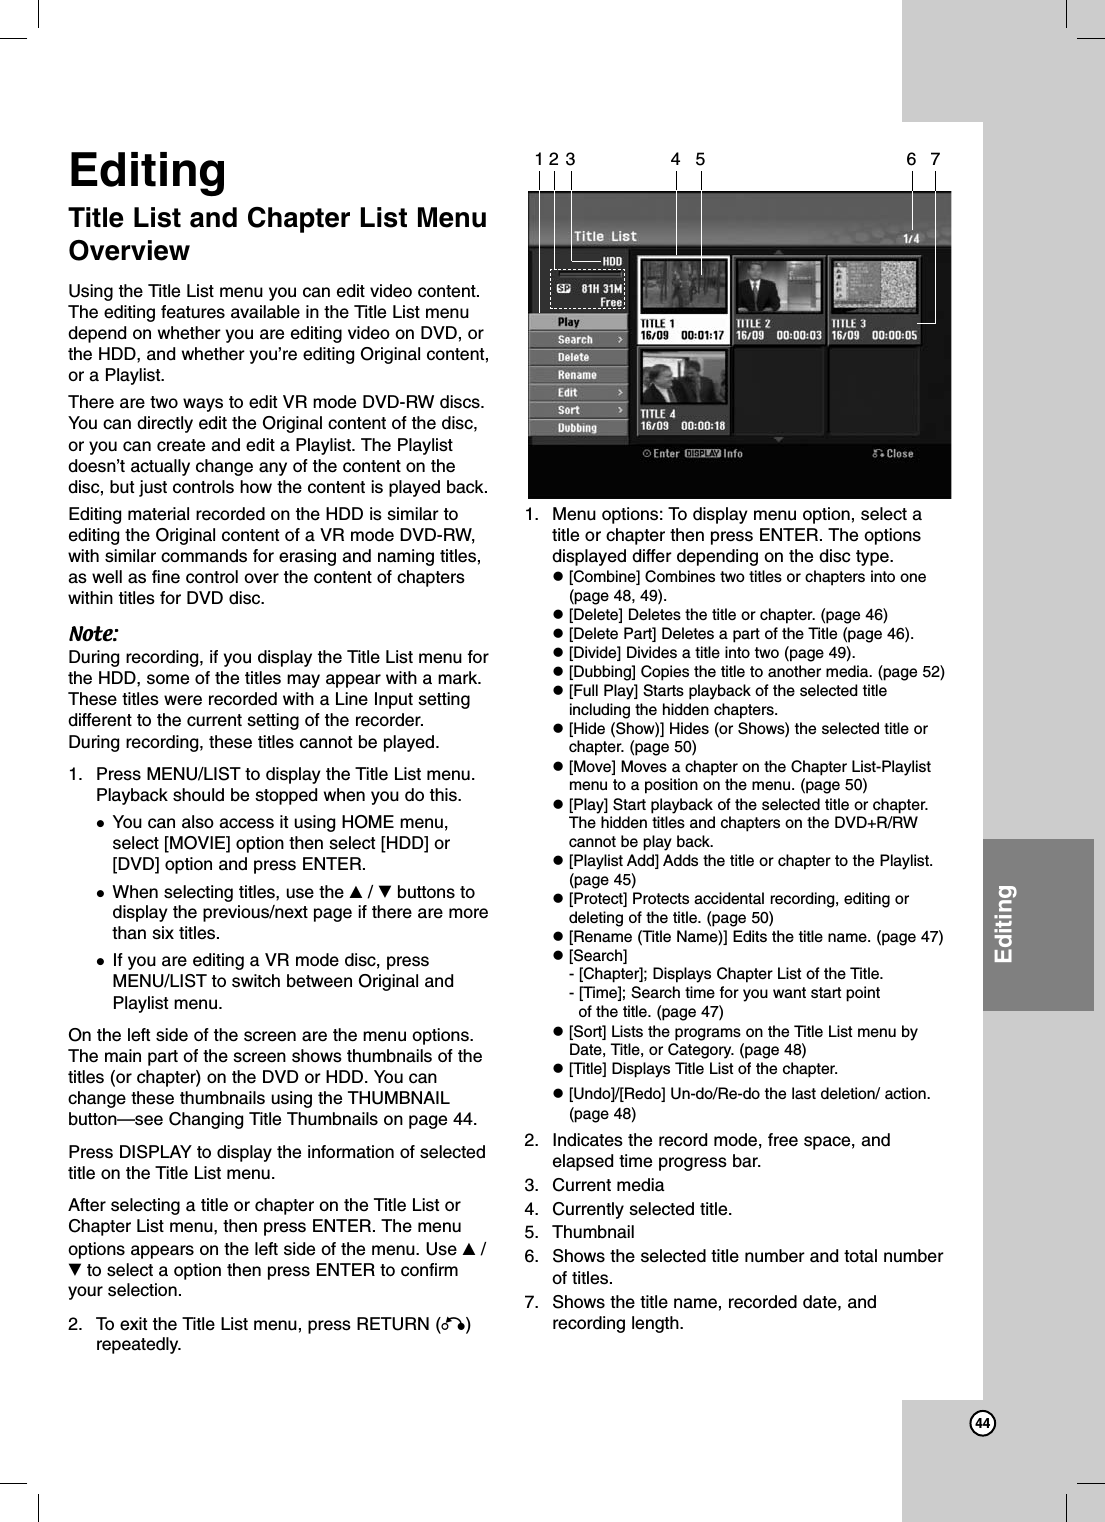 44EditingEditingTitle List and Chapter List MenuOverviewUsing the Title List menu you can edit video content.The editing features available in the Title List menudepend on whether you are editing video on DVD, orthe HDD, and whether you’re editing Original content,or a Playlist.There are two ways to edit VR mode DVD-RW discs.You can directly edit the Original content of the disc,or you can create and edit a Playlist. The Playlistdoesn’t actually change any of the content on thedisc, but just controls how the content is played back.Editing material recorded on the HDD is similar toediting the Original content of a VR mode DVD-RW,with similar commands for erasing and naming titles,as well as fine control over the content of chapterswithin titles for DVD disc.Note:During recording, if you display the Title List menu forthe HDD, some of the titles may appear with a mark.These titles were recorded with a Line Input settingdifferent to the current setting of the recorder.During recording, these titles cannot be played.1. Press MENU/LIST to display the Title List menu.Playback should be stopped when you do this.You can also access it using HOME menu,select [MOVIE] option then select [HDD] or[DVD] option and press ENTER.When selecting titles, use the v/Vbuttons todisplay the previous/next page if there are morethan six titles.If you are editing a VR mode disc, pressMENU/LIST to switch between Original andPlaylist menu.On the left side of the screen are the menu options.The main part of the screen shows thumbnails of thetitles (or chapter) on the DVD or HDD. You canchange these thumbnails using the THUMBNAILbutton—see Changing Title Thumbnails on page 44.Press DISPLAY to display the information of selectedtitle on the Title List menu.After selecting a title or chapter on the Title List orChapter List menu, then press ENTER. The menuoptions appears on the left side of the menu. Use v/Vto select a option then press ENTER to confirmyour selection. 2. To exit the Title List menu, press RETURN (O)repeatedly.1. Menu options: To display menu option, select atitle or chapter then press ENTER. The optionsdisplayed differ depending on the disc type.[Combine] Combines two titles or chapters into one(page 48, 49).[Delete] Deletes the title or chapter. (page 46)[Delete Part] Deletes a part of the Title (page 46).[Divide] Divides a title into two (page 49).[Dubbing] Copies the title to another media. (page 52)[Full Play] Starts playback of the selected titleincluding the hidden chapters.[Hide (Show)] Hides (or Shows) the selected title orchapter. (page 50)[Move] Moves a chapter on the Chapter List-Playlistmenu to a position on the menu. (page 50)[Play] Start playback of the selected title or chapter.The hidden titles and chapters on the DVD+R/RWcannot be play back.[Playlist Add] Adds the title or chapter to the Playlist.(page 45)[Protect] Protects accidental recording, editing ordeleting of the title. (page 50)[Rename (Title Name)] Edits the title name. (page 47)[Search]- [Chapter]; Displays Chapter List of the Title.- [Time]; Search time for you want start pointof the title. (page 47)[Sort] Lists the programs on the Title List menu byDate, Title, or Category. (page 48)[Title] Displays Title List of the chapter.[Undo]/[Redo] Un-do/Re-do the last deletion/ action.(page 48)2. Indicates the record mode, free space, andelapsed time progress bar.3. Current media4. Currently selected title.5. Thumbnail6. Shows the selected title number and total numberof titles.7. Shows the title name, recorded date, andrecording length.123 4 5 6 7